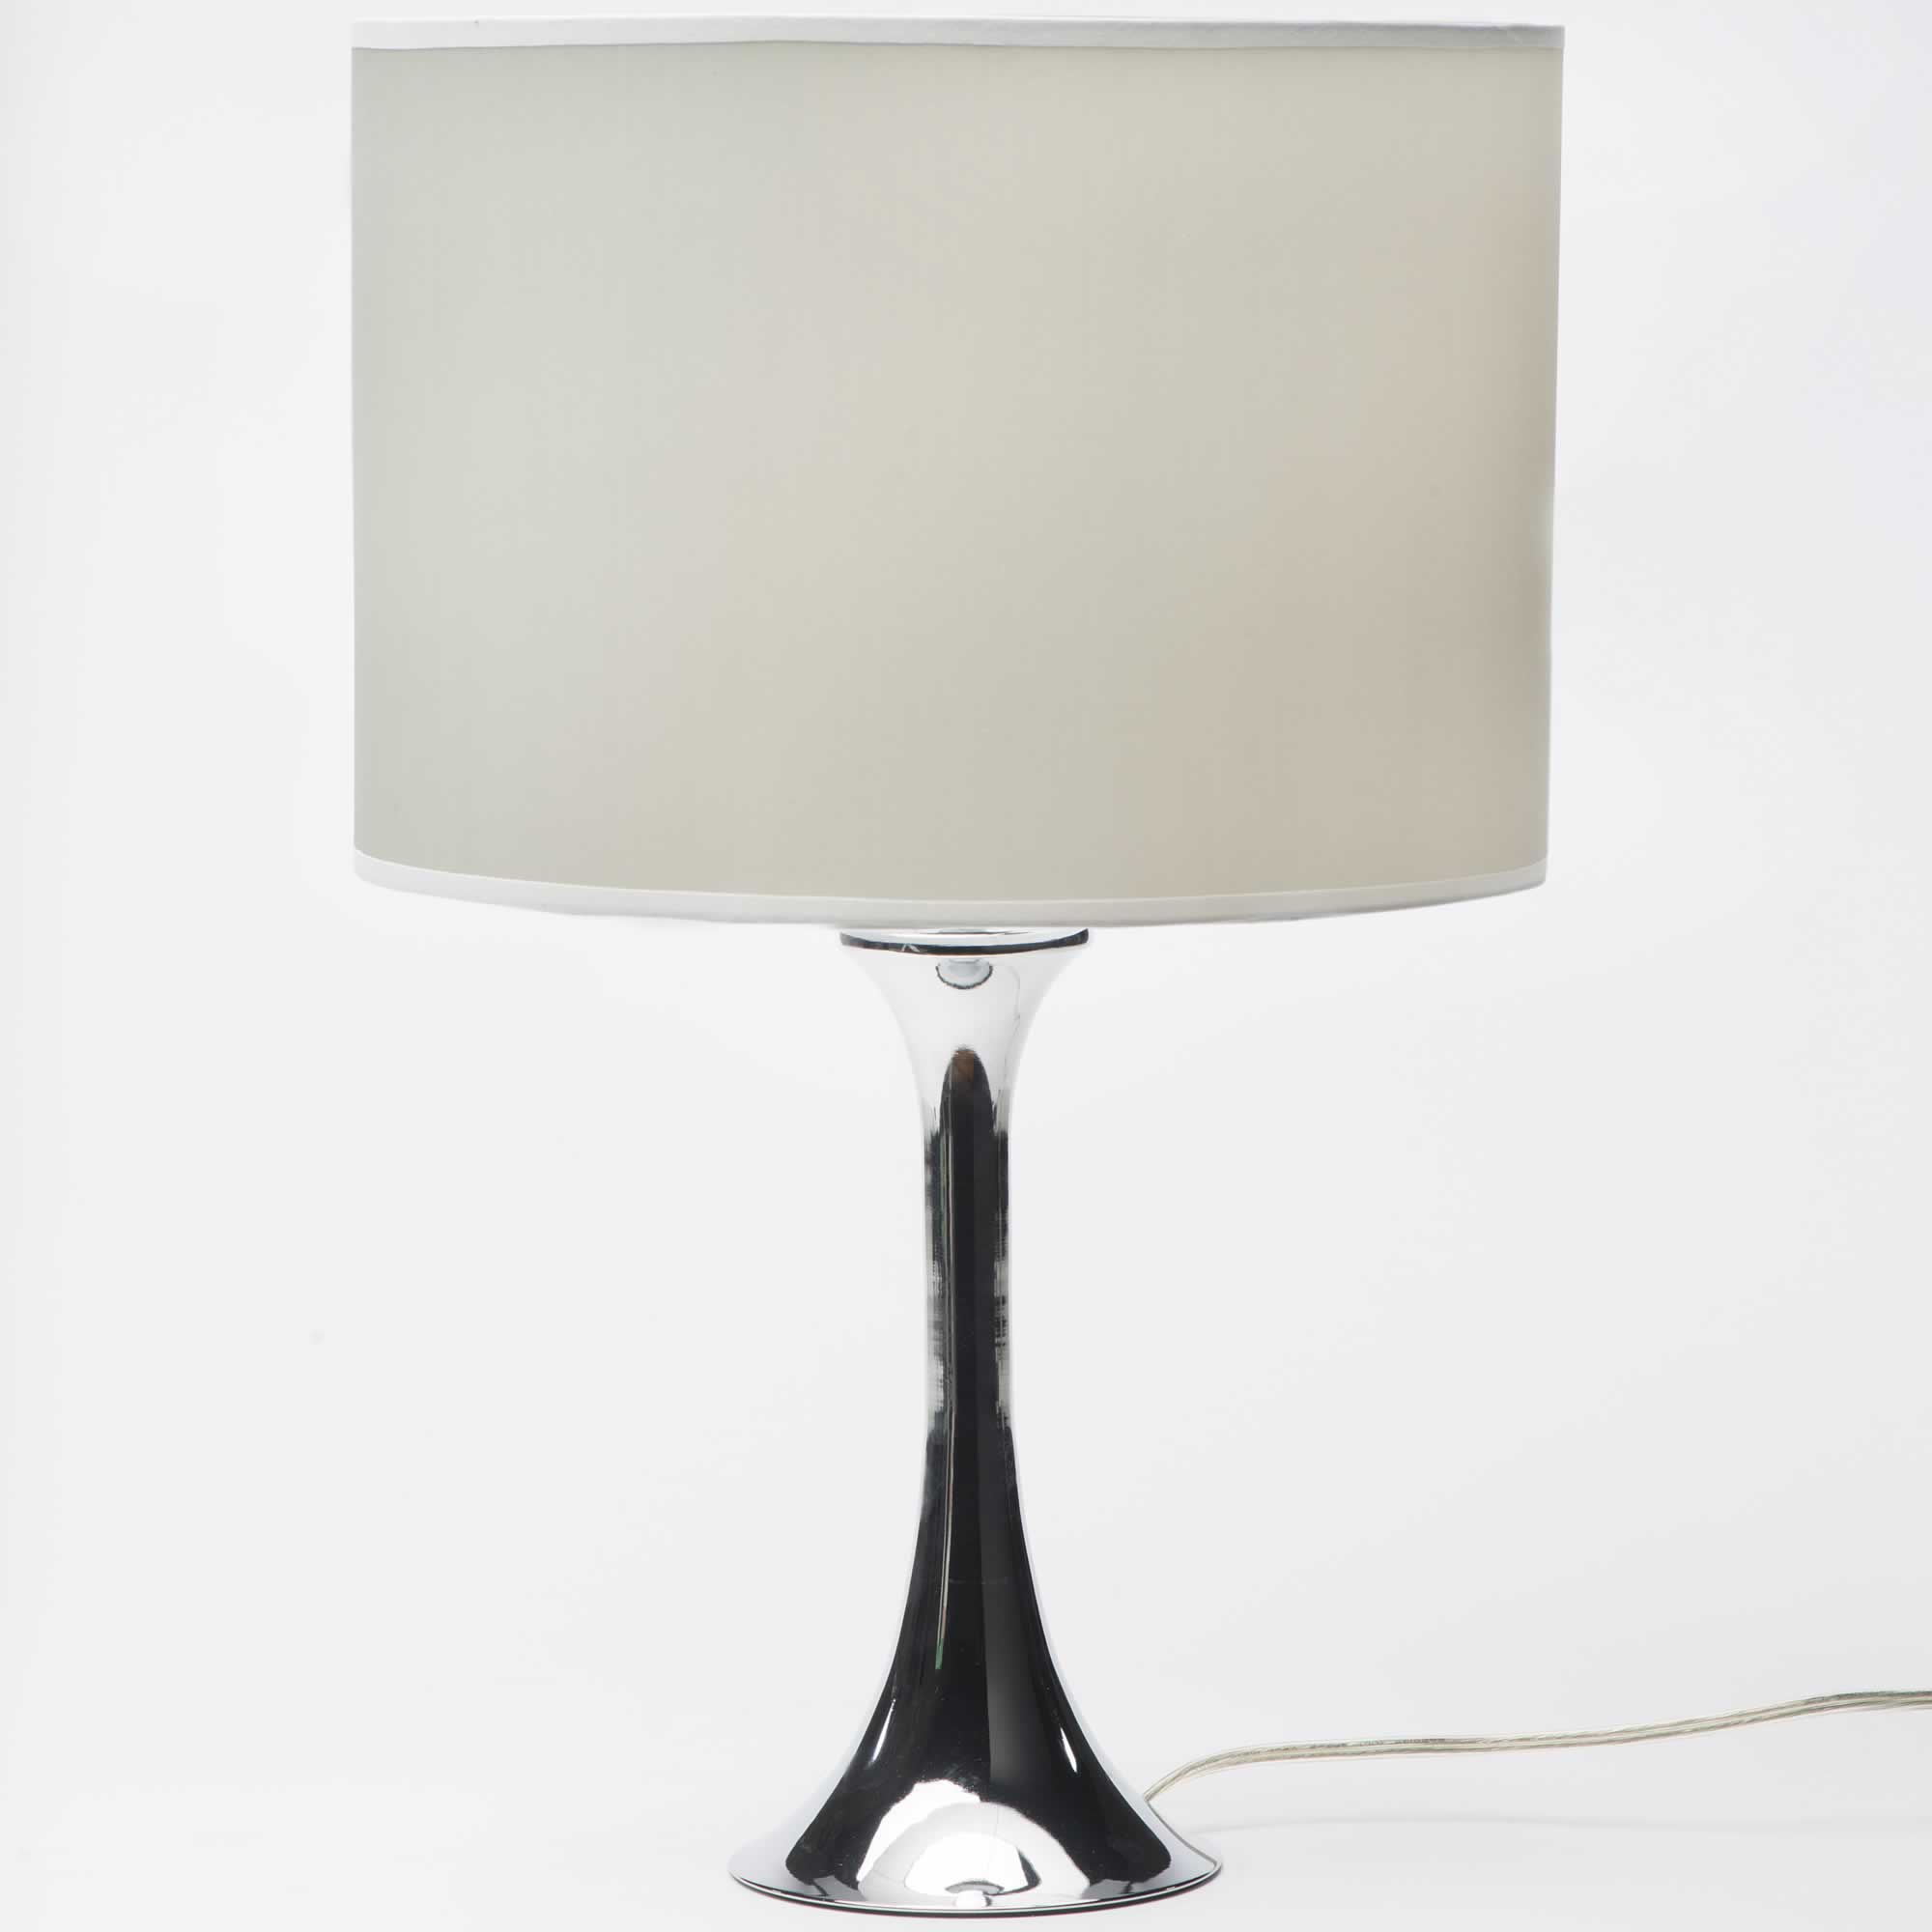 The Silver Bell Table Lamp - TL0004